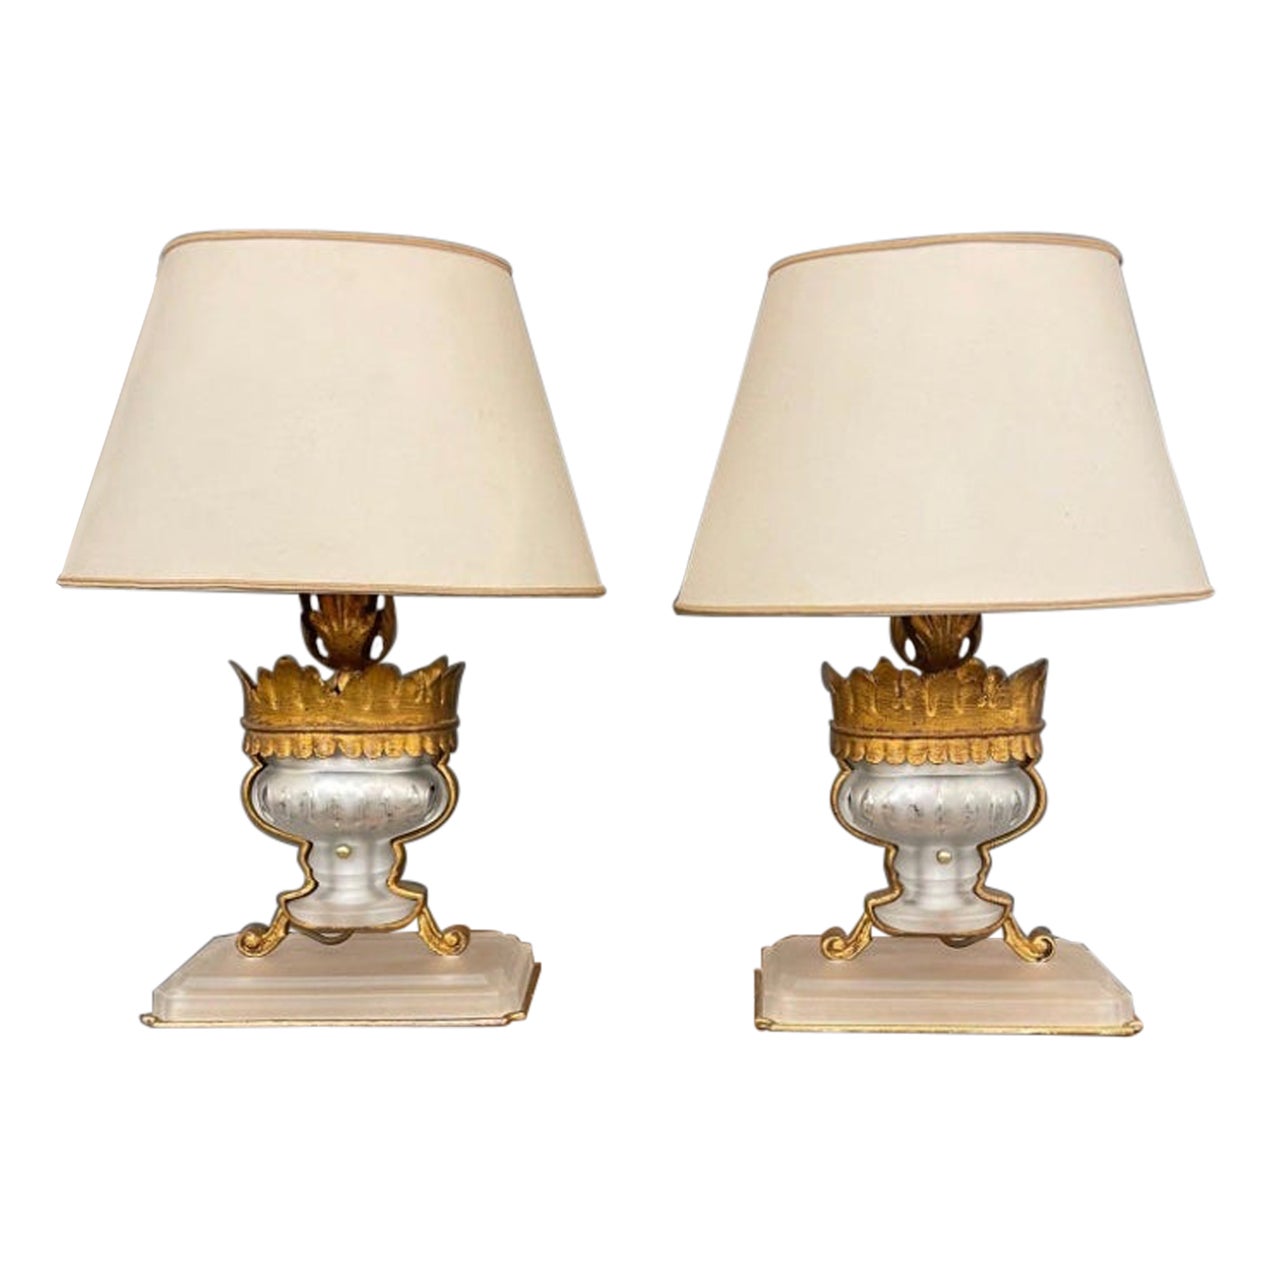 Pair of Table Lamps in the Style of Maison Bagues